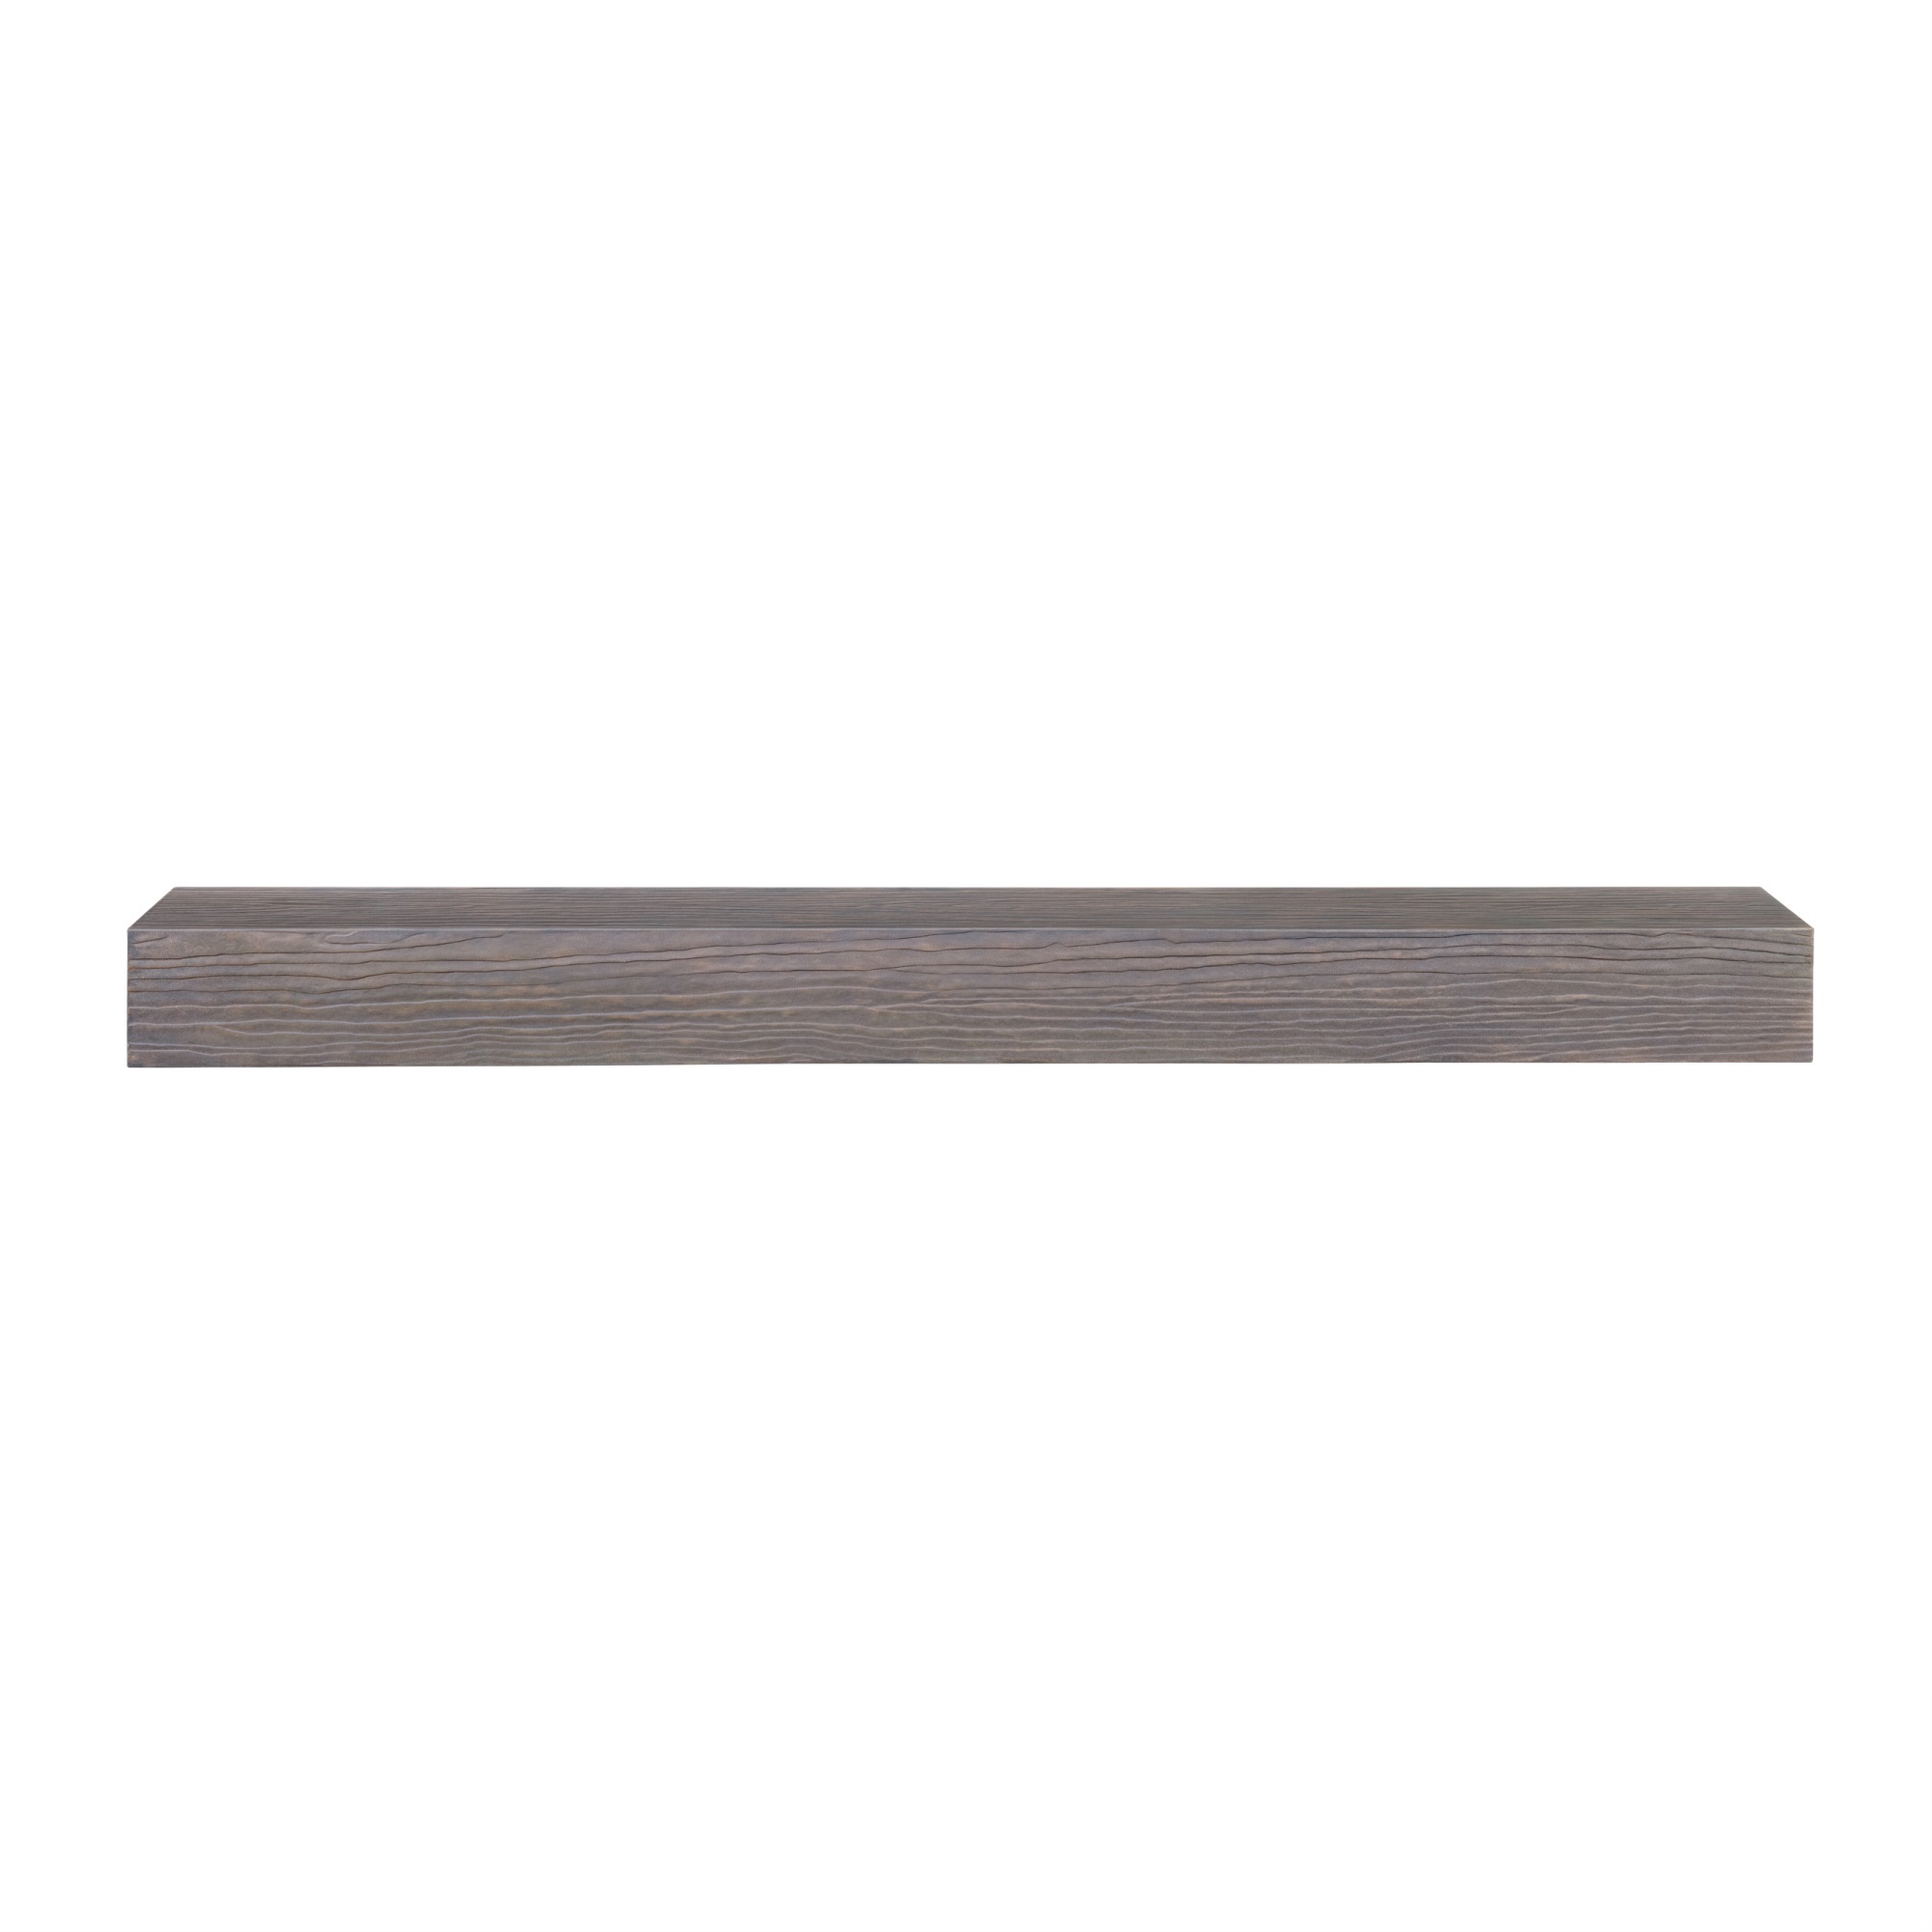 Pearl Mantels Corp. Zachary Non-combustible natural wood look 60" Shelf Little River Finish